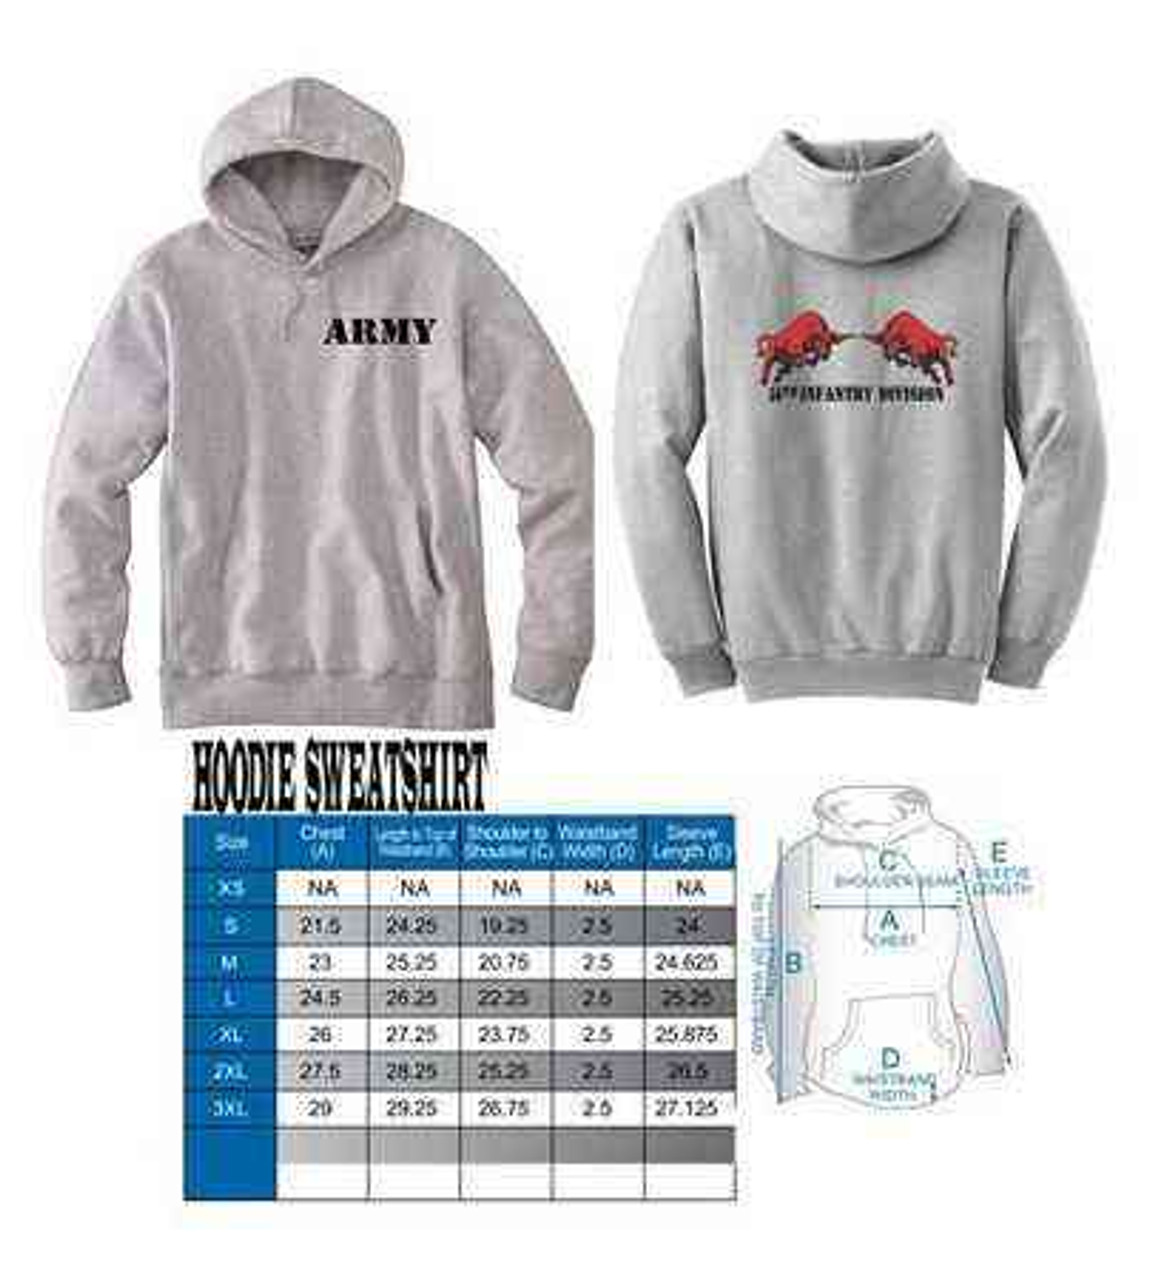 army 34th infantry division bull hooded sweatshirt